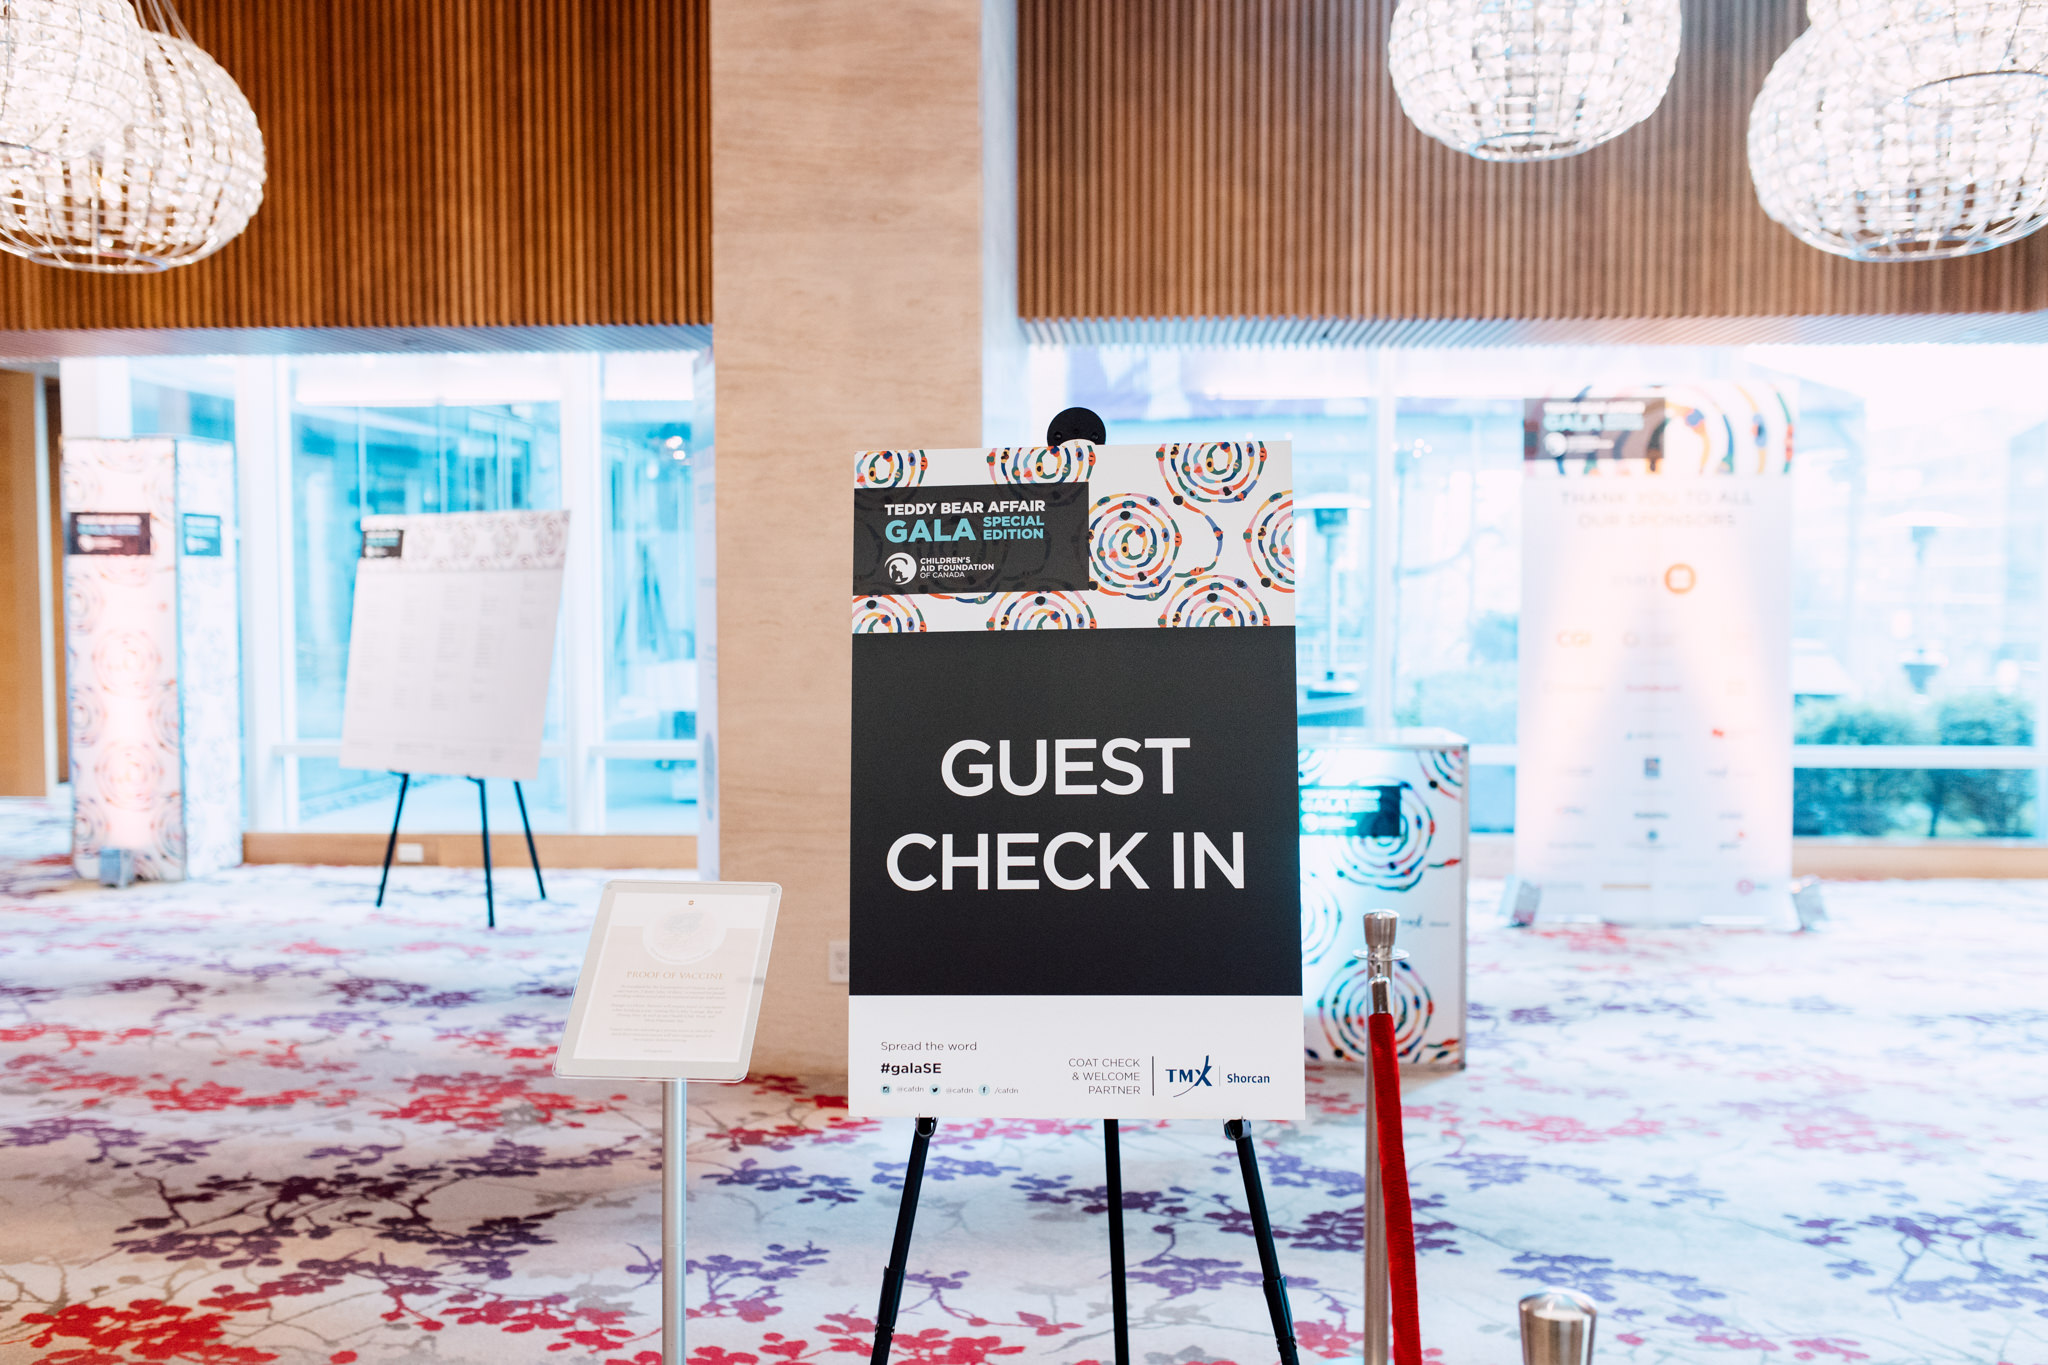 Guest check-in